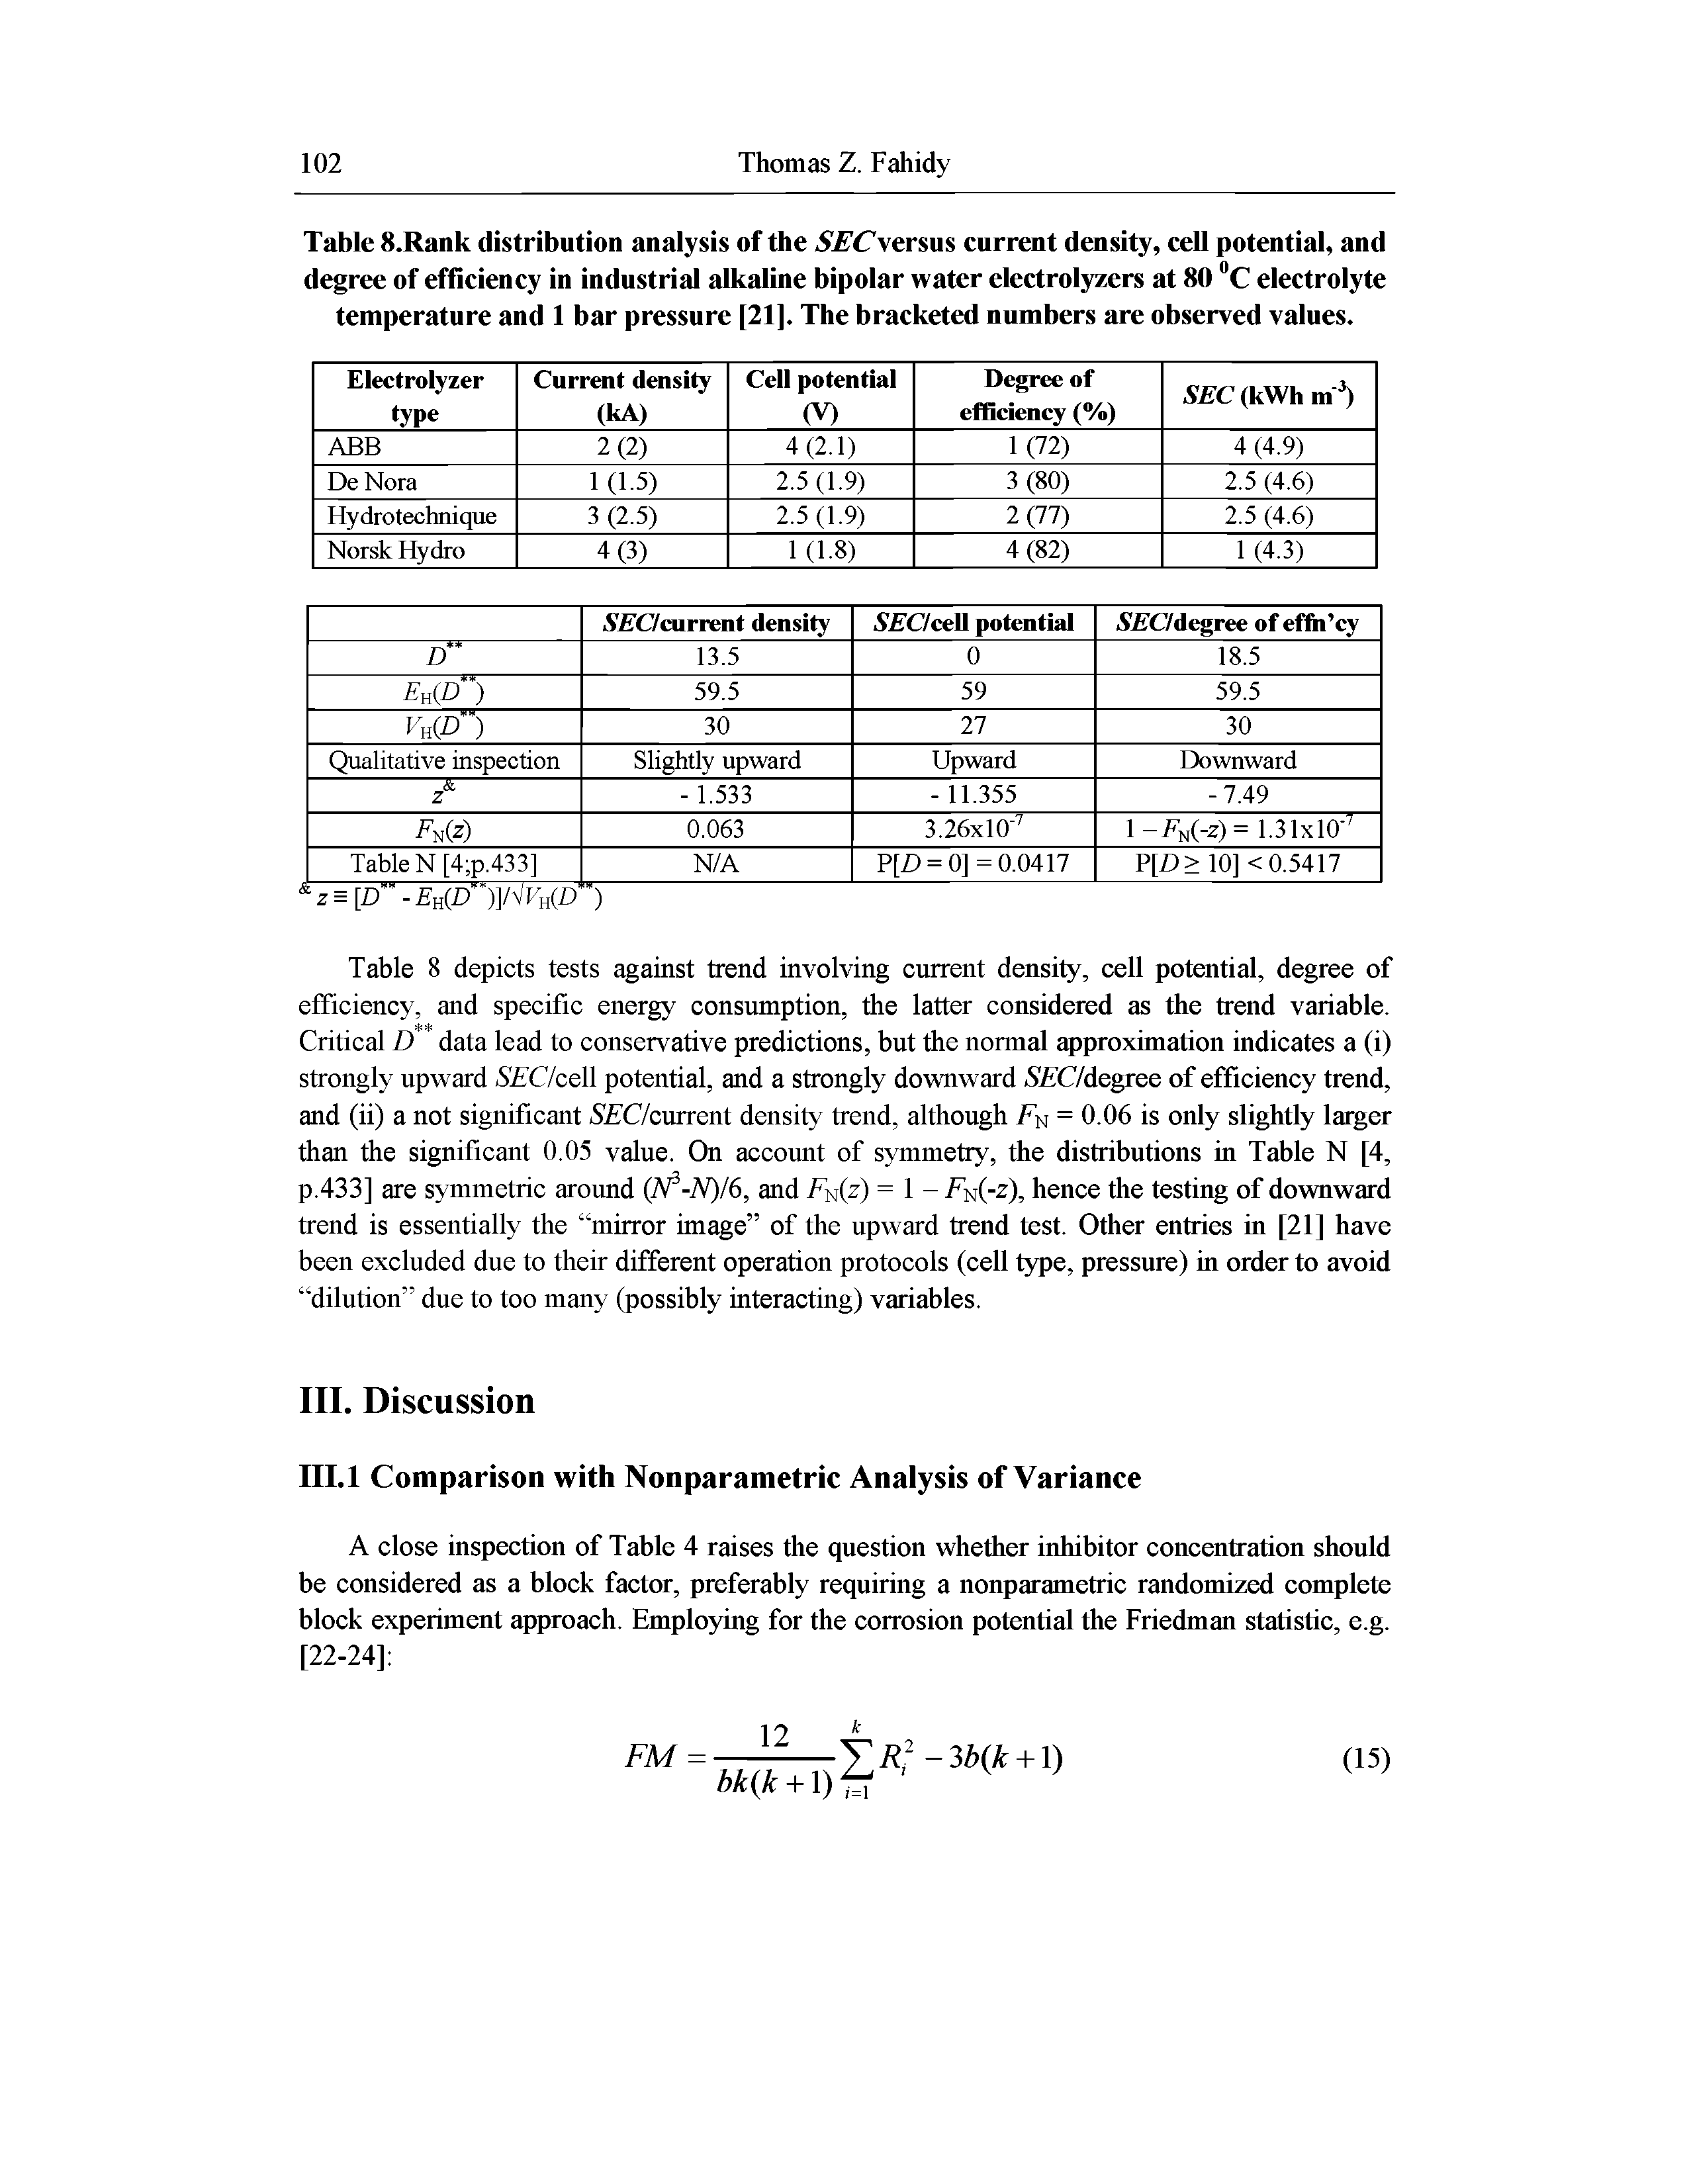 Table 8.Rank distribution analysis of the SECversus current density, cell potential, and degree of efficiency in industrial alkaline bipolar water electrolyzers at 80 C electrolyte temperature and 1 bar pressure [21]. The bracketed numbers are observed values.